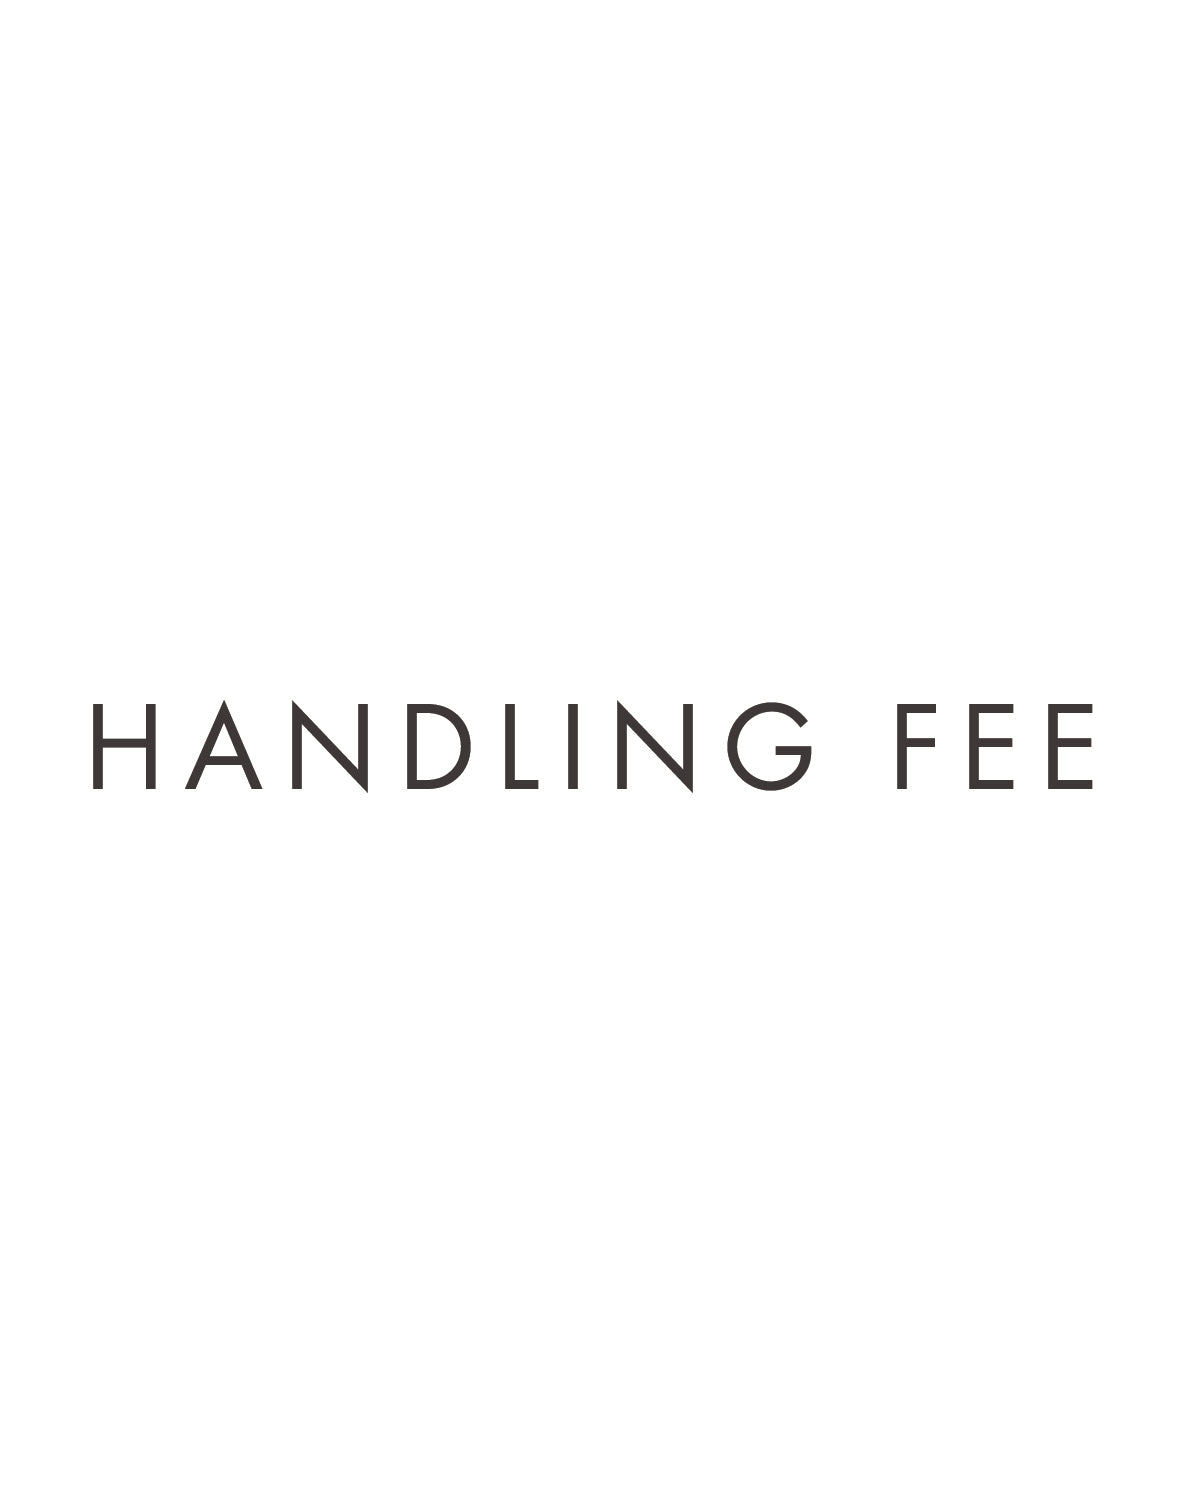 McGee & Co., Handling Fee for "Winifred Dining Table"